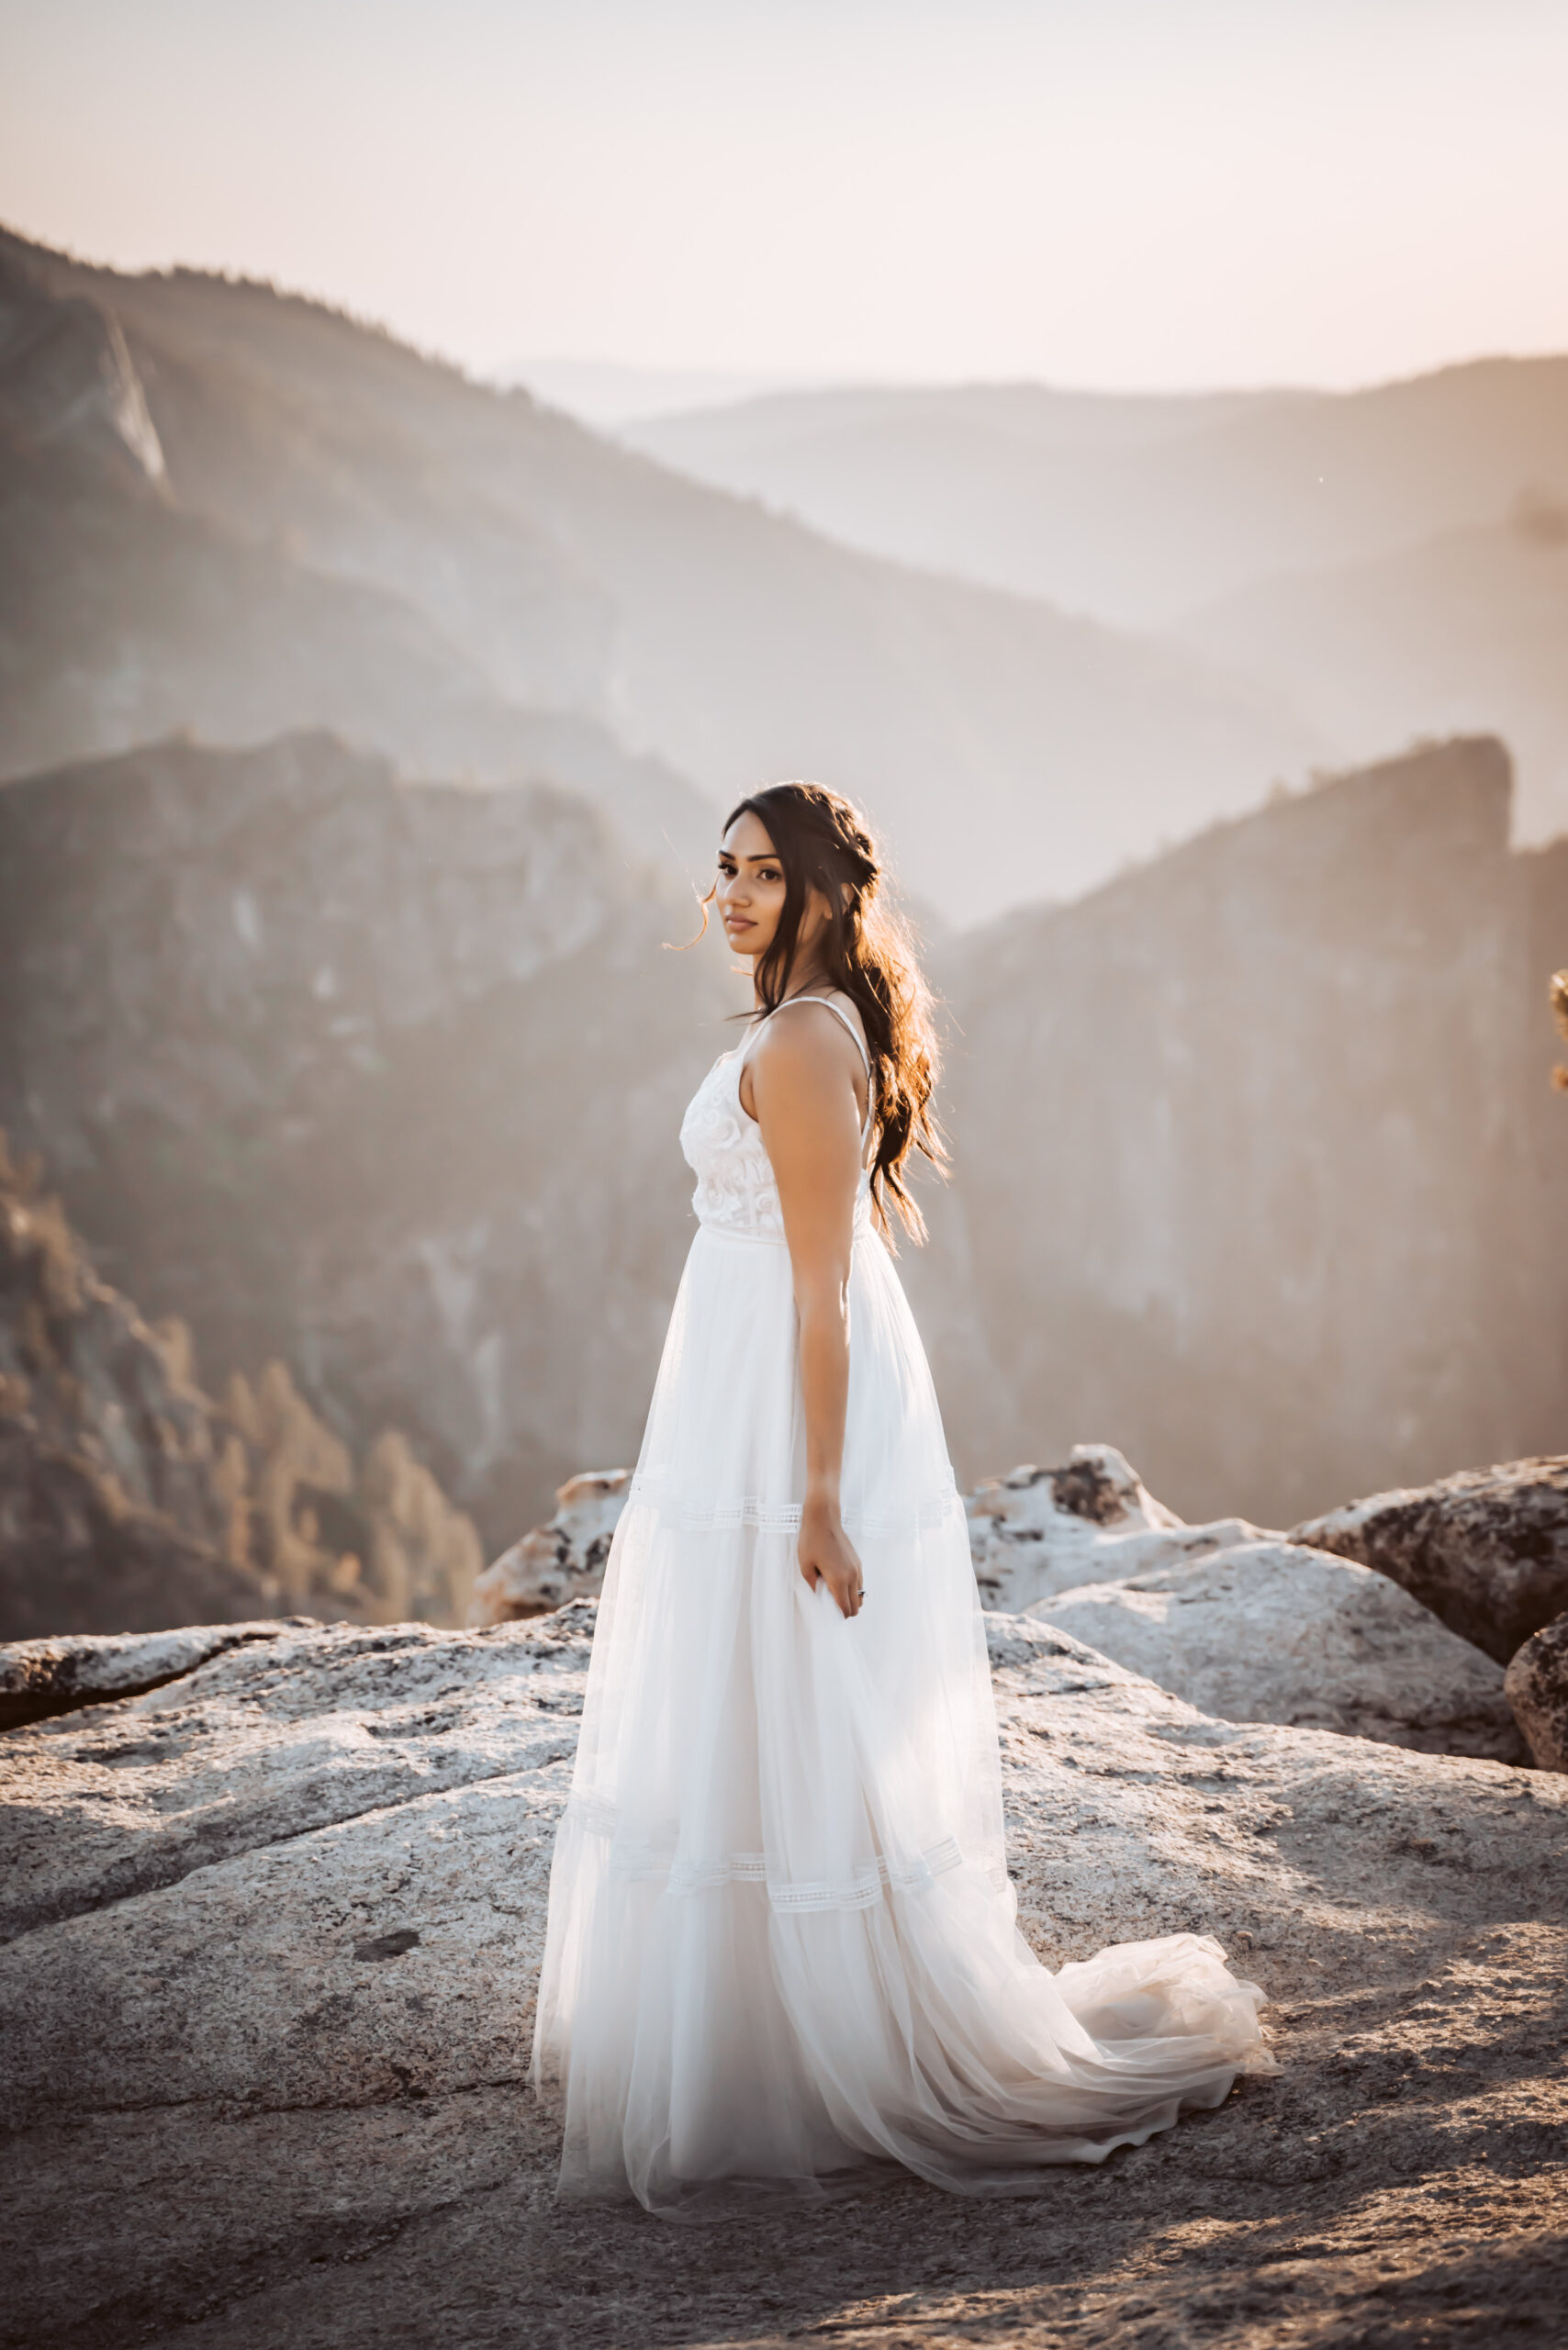 A bride standing on a cliff overlooking the sunset for her elopement in the Mountains